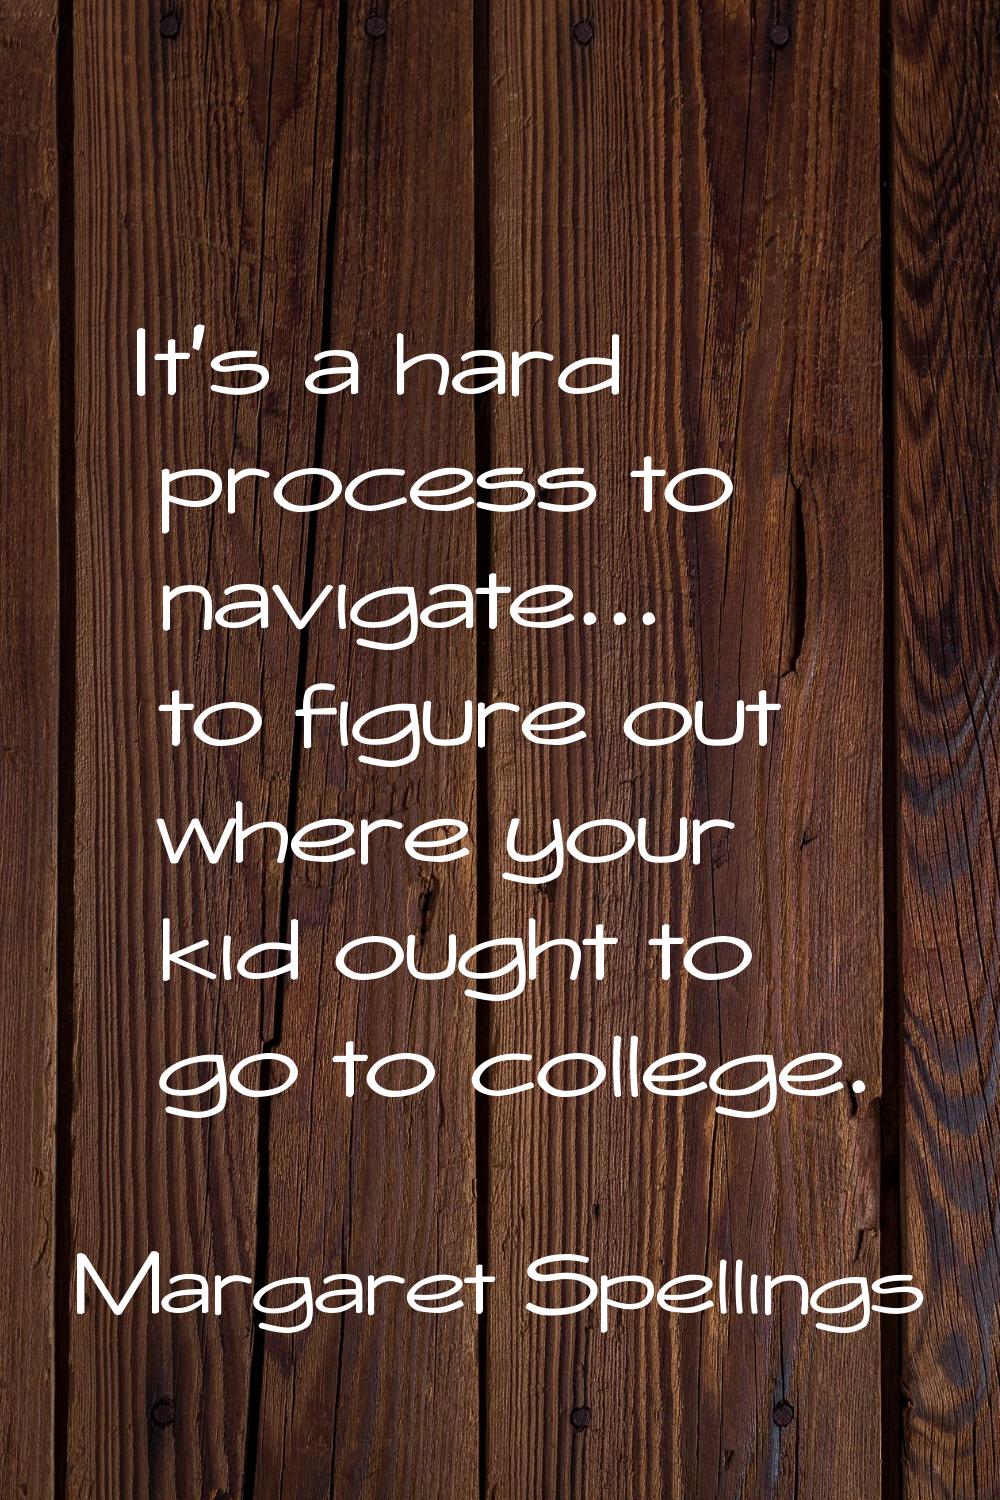 It's a hard process to navigate... to figure out where your kid ought to go to college.